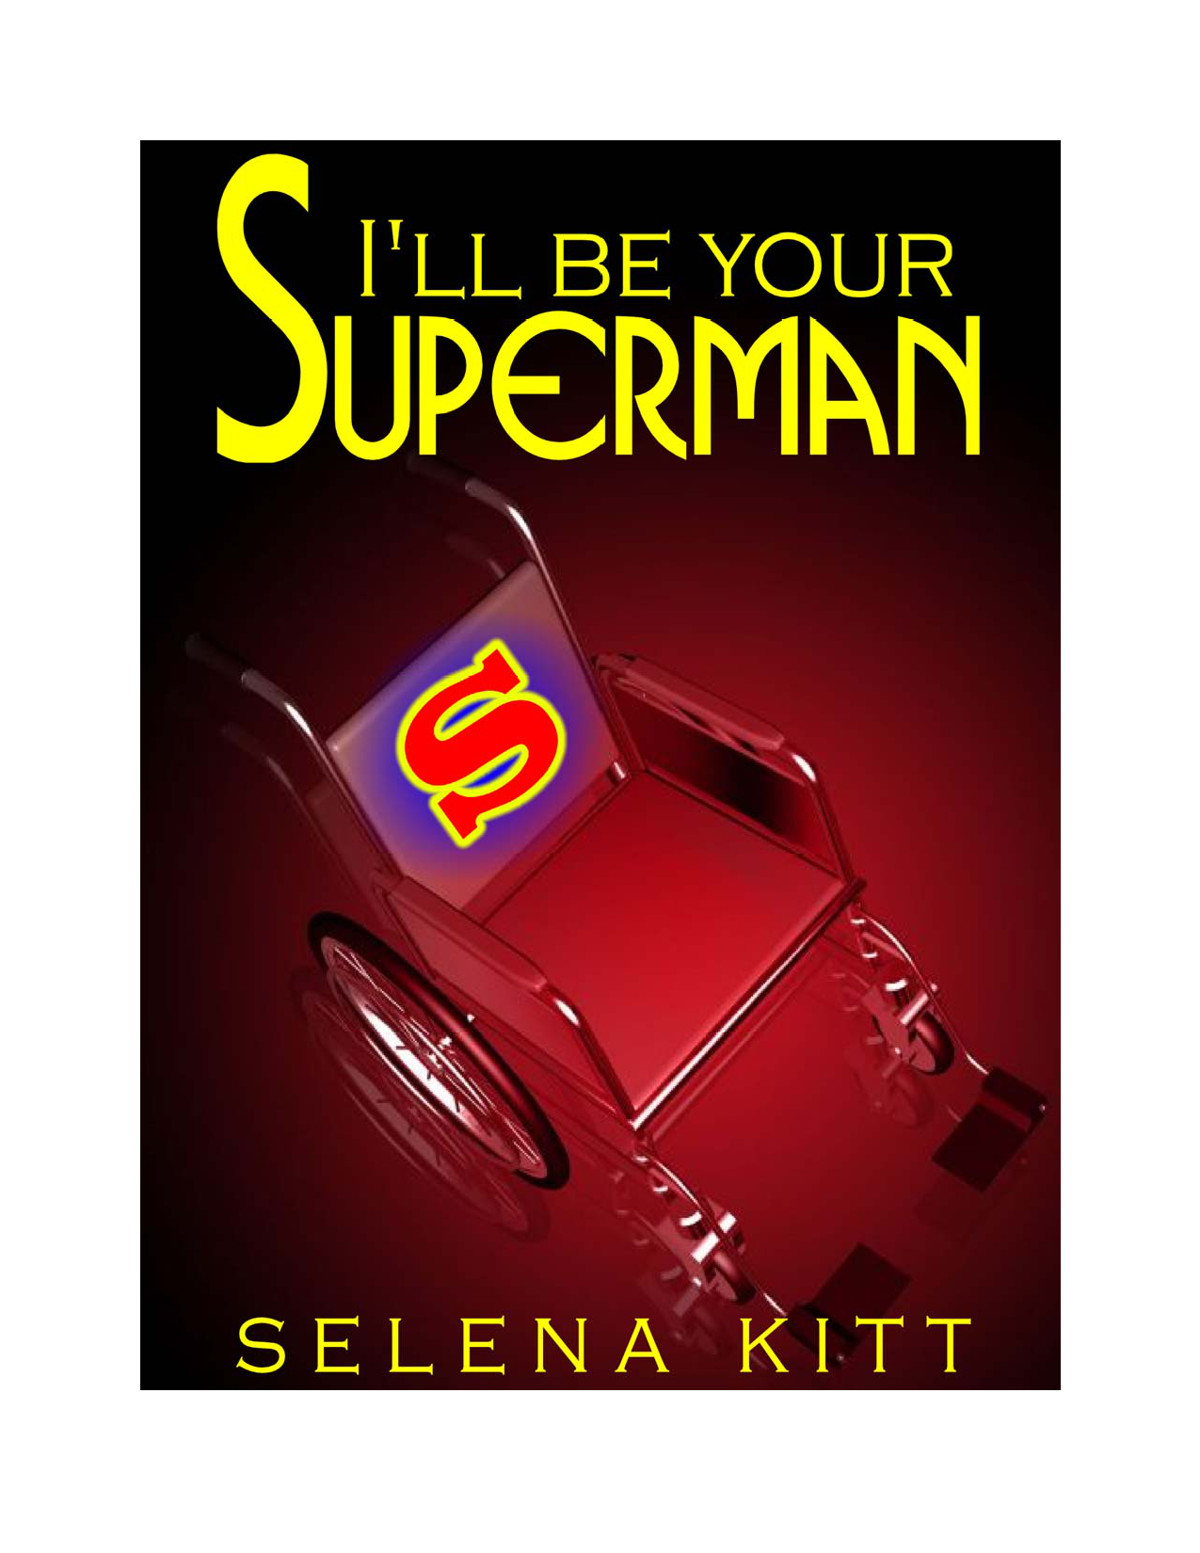 I’ll be your superman